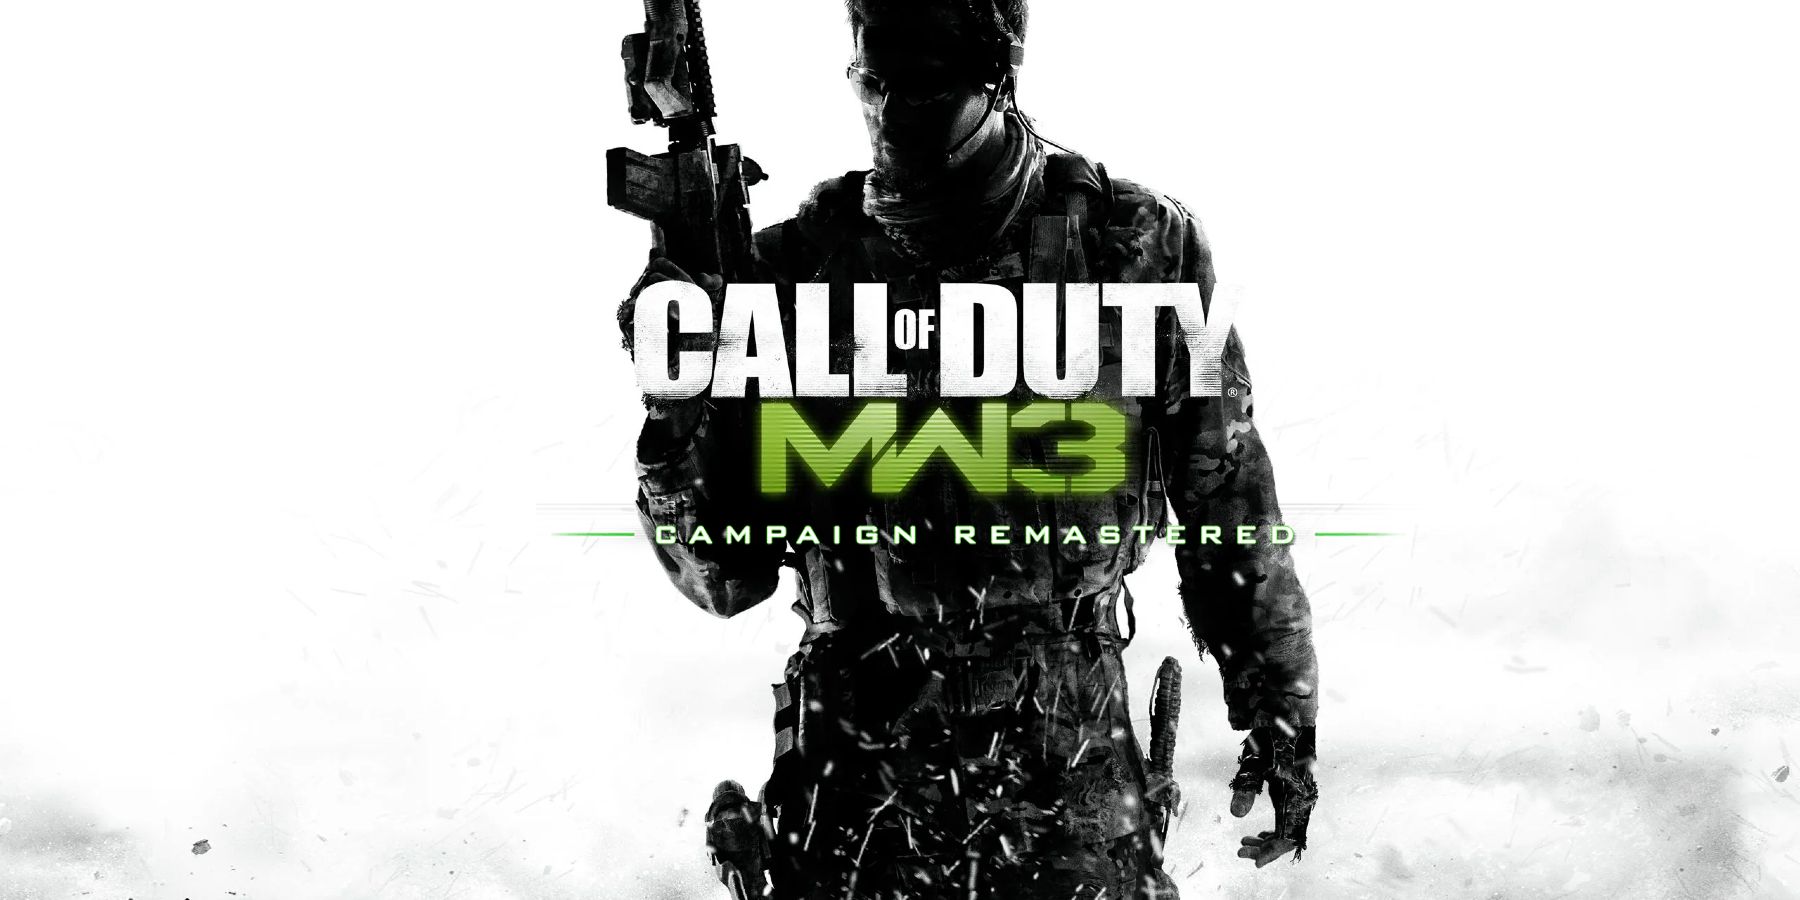 call-of-duty-modern-warfare-3-campaign-remastered-would-be-a-great-way-to-fill-cod-s-first-gap-year